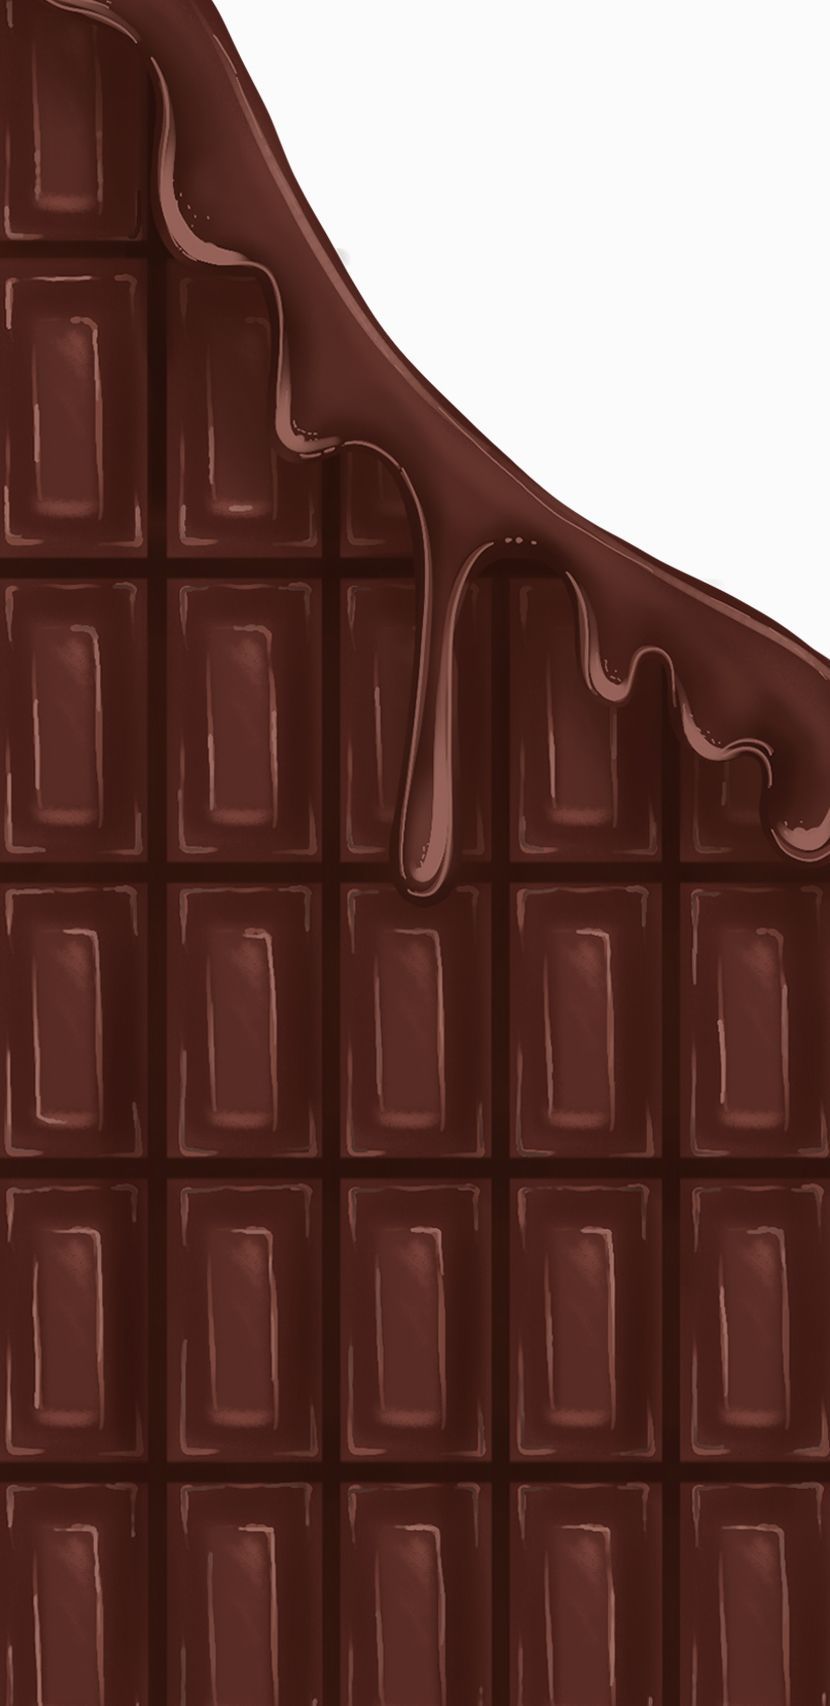 Can you imagine a world without chocolate?. Phone screen wallpaper, Background phone wallpaper, Aesthetic iphone wallpaper